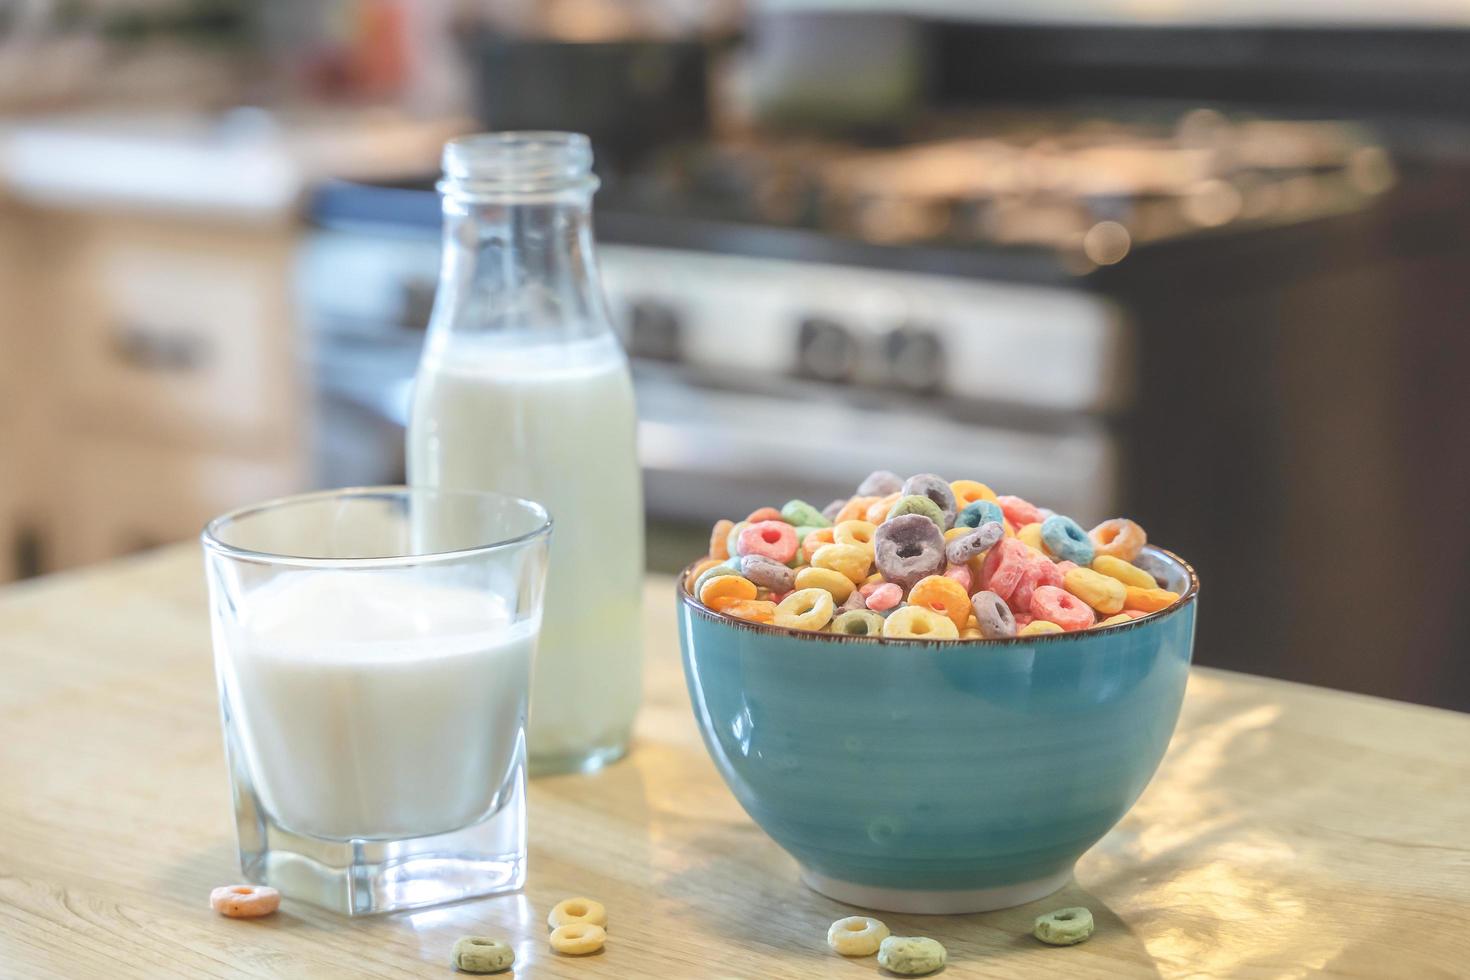 Bowl of colorful children's cereal and milk isolated on wood table with Text space photo